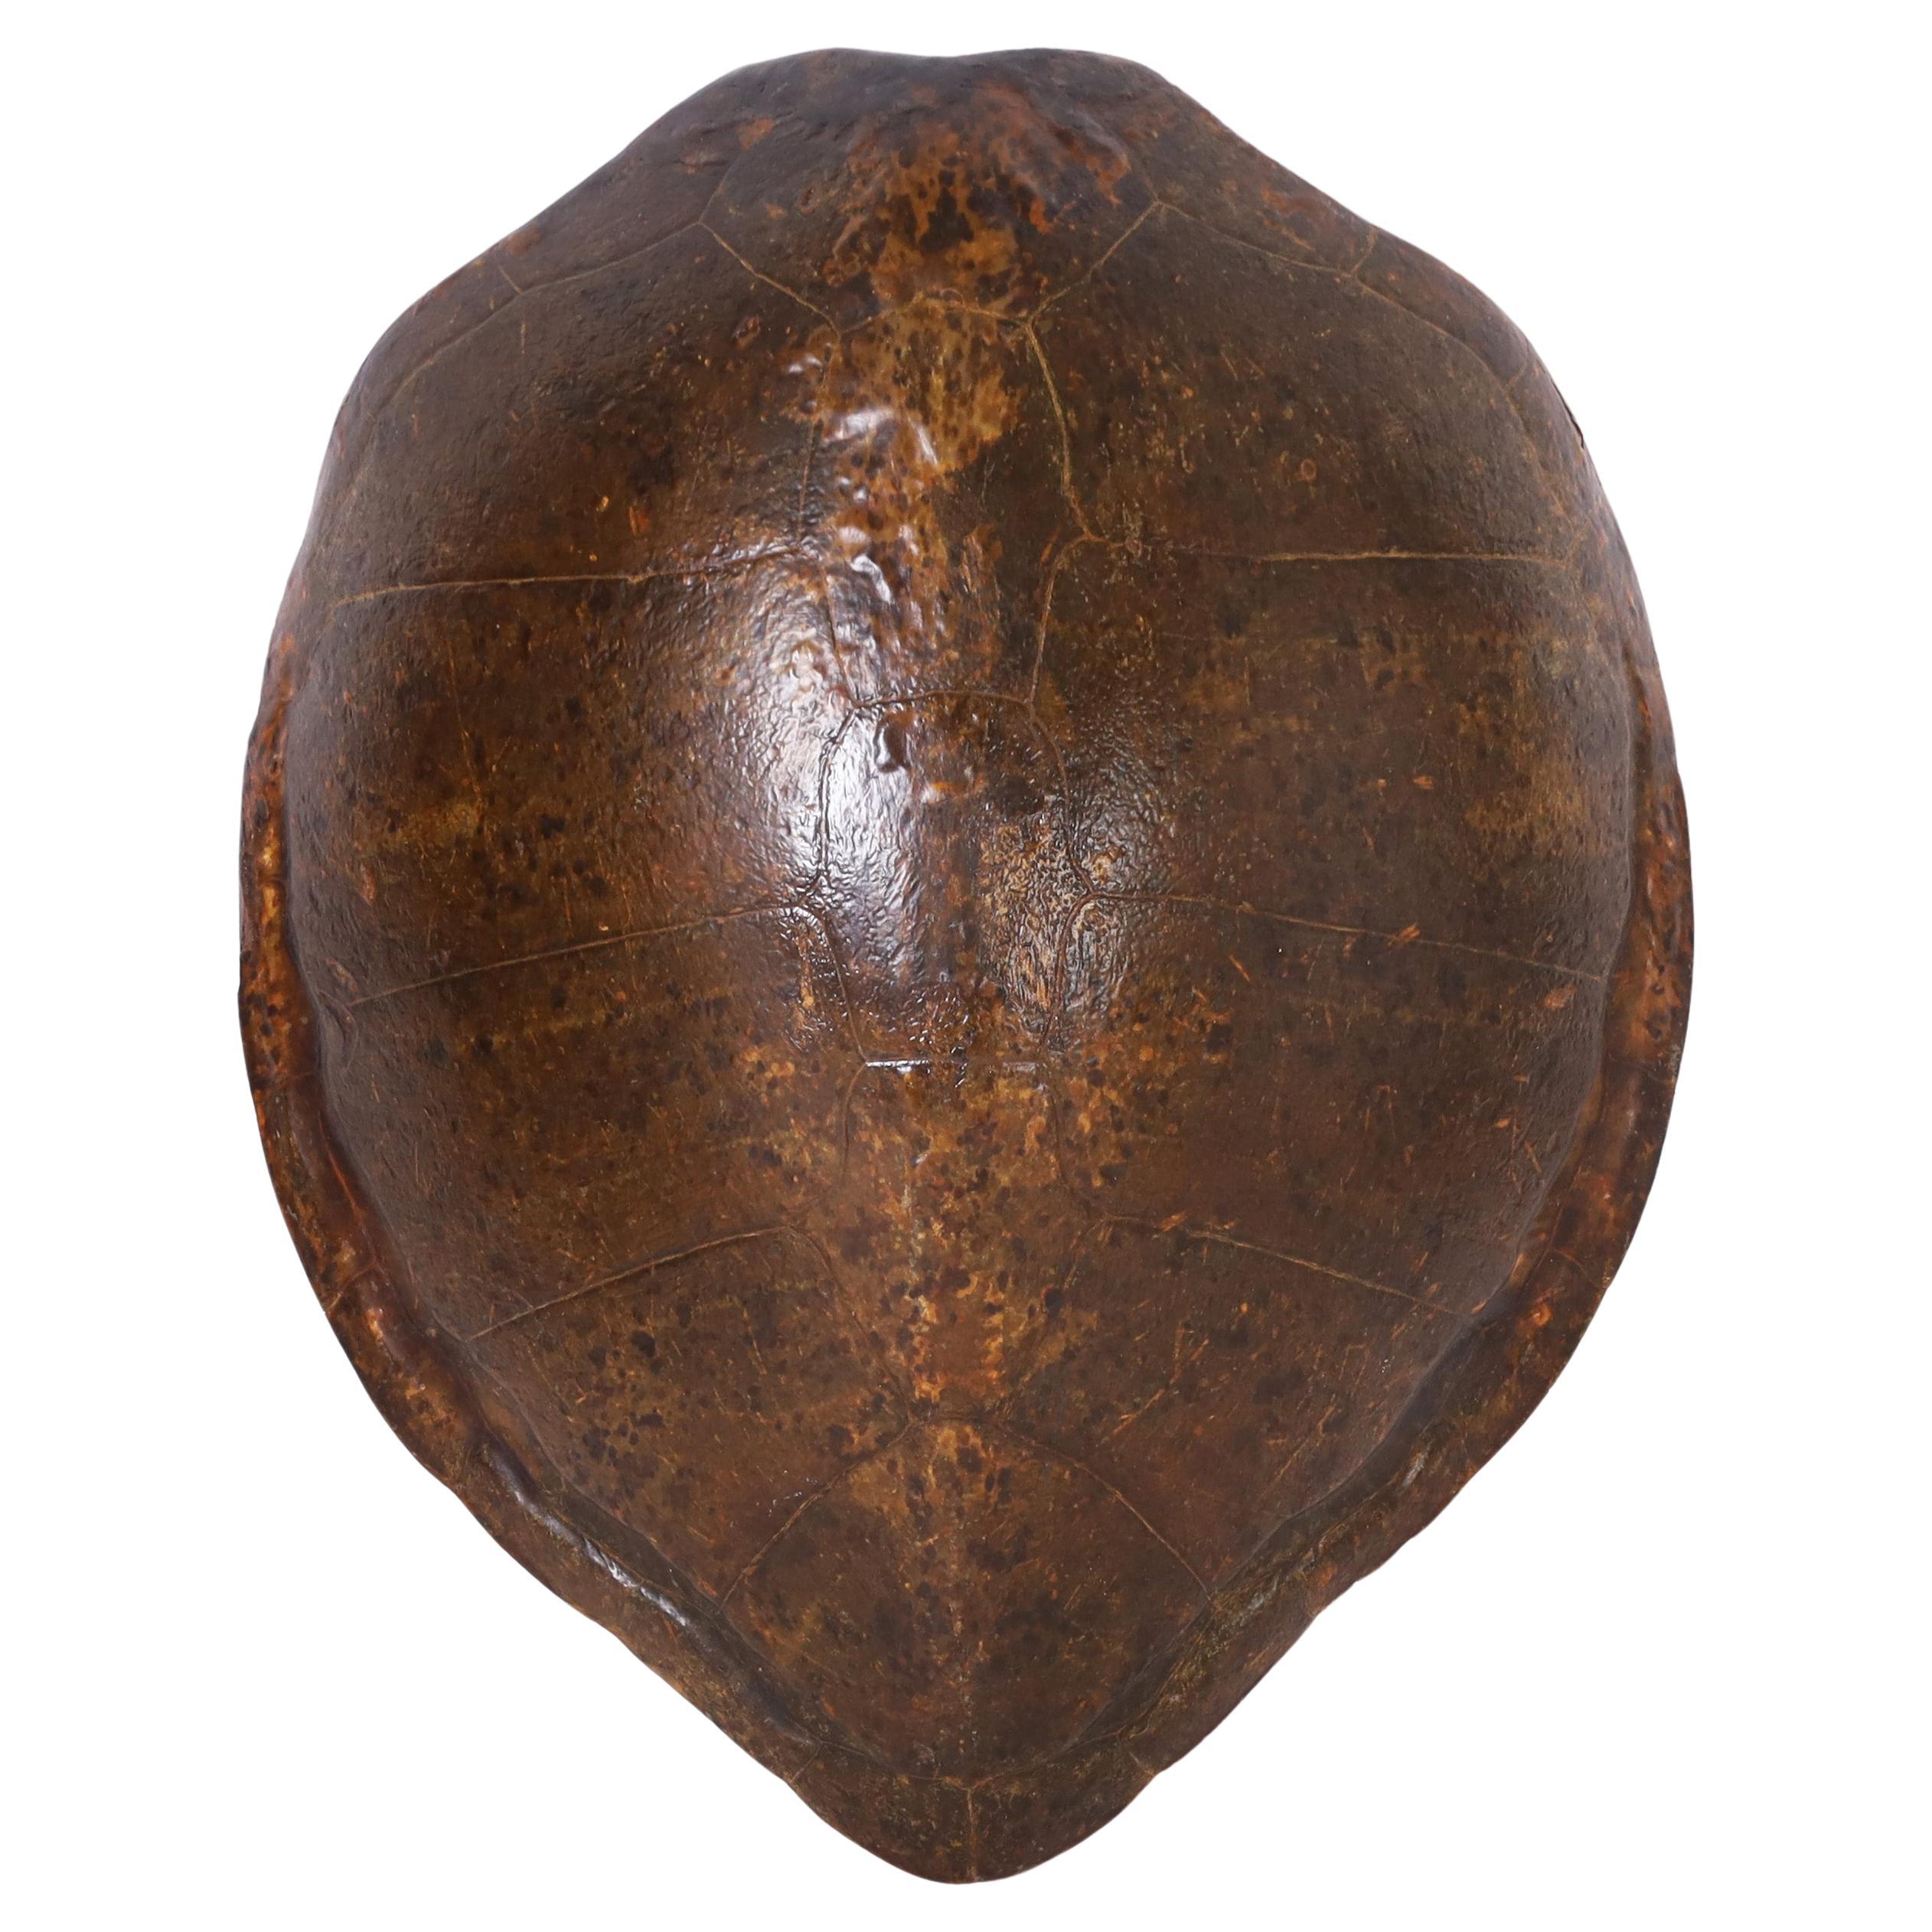 Giant Turtle Shell or Carapace For Sale